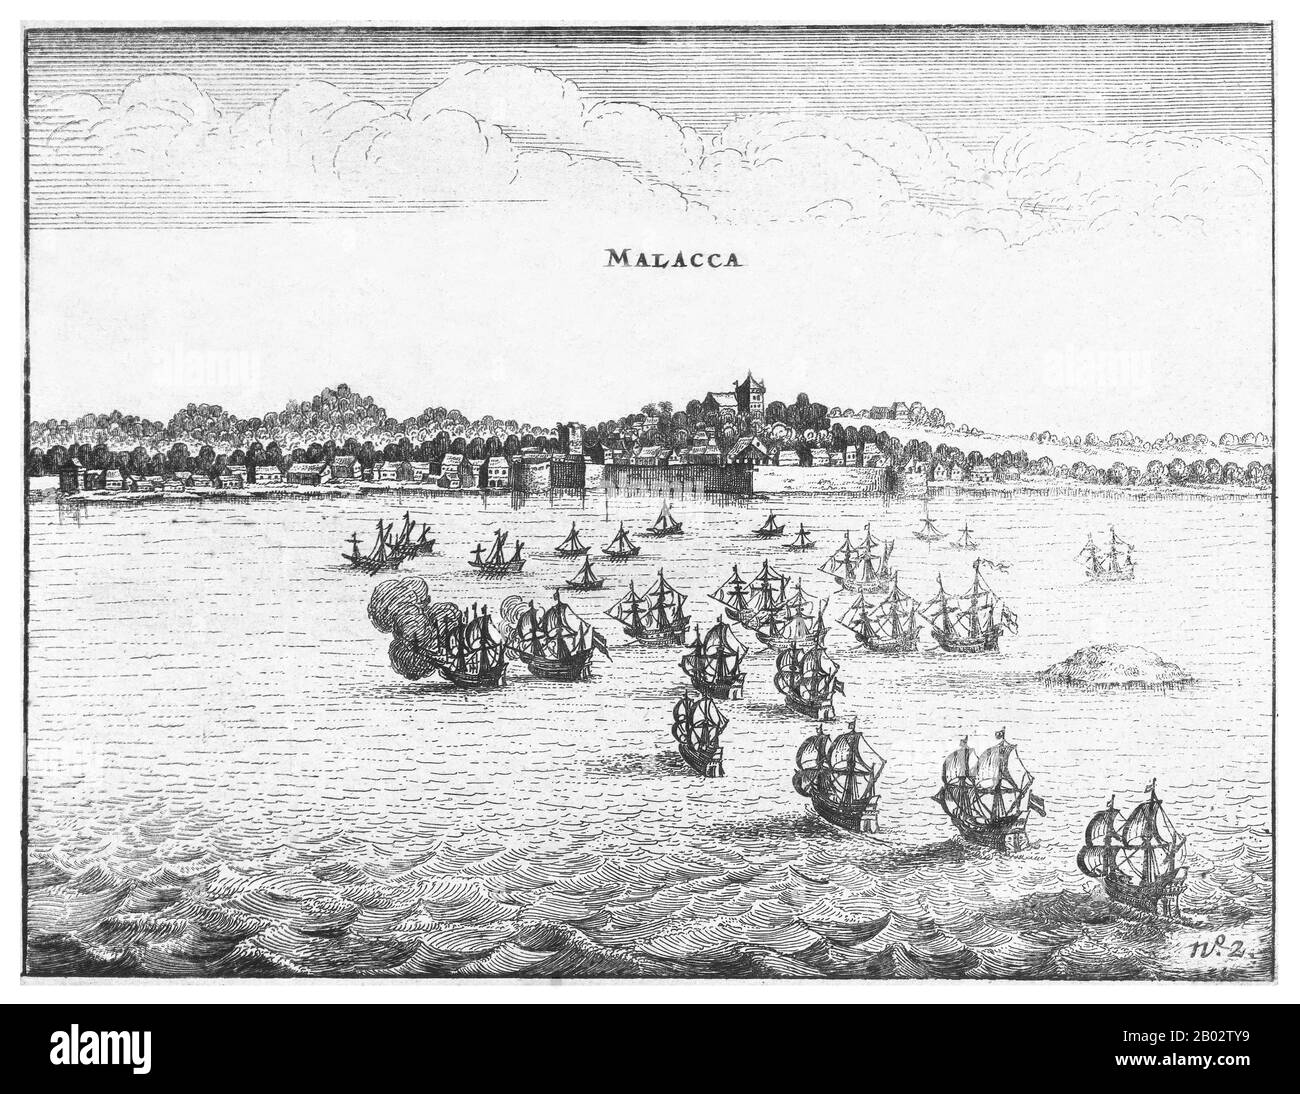 The Dutch East India Company (VOC) was set up in 1602 to gain a foothold in the East Indies (Indonesia) for the Dutch in the lucrative spice trade, which until that point was dominated by the Portuguese.  It was a chartered company granted a monopoly by the Dutch government to carry out colonial activities in Asia, including establishing colonies in Ceylon (Sri Lanka) and India. Stock Photo